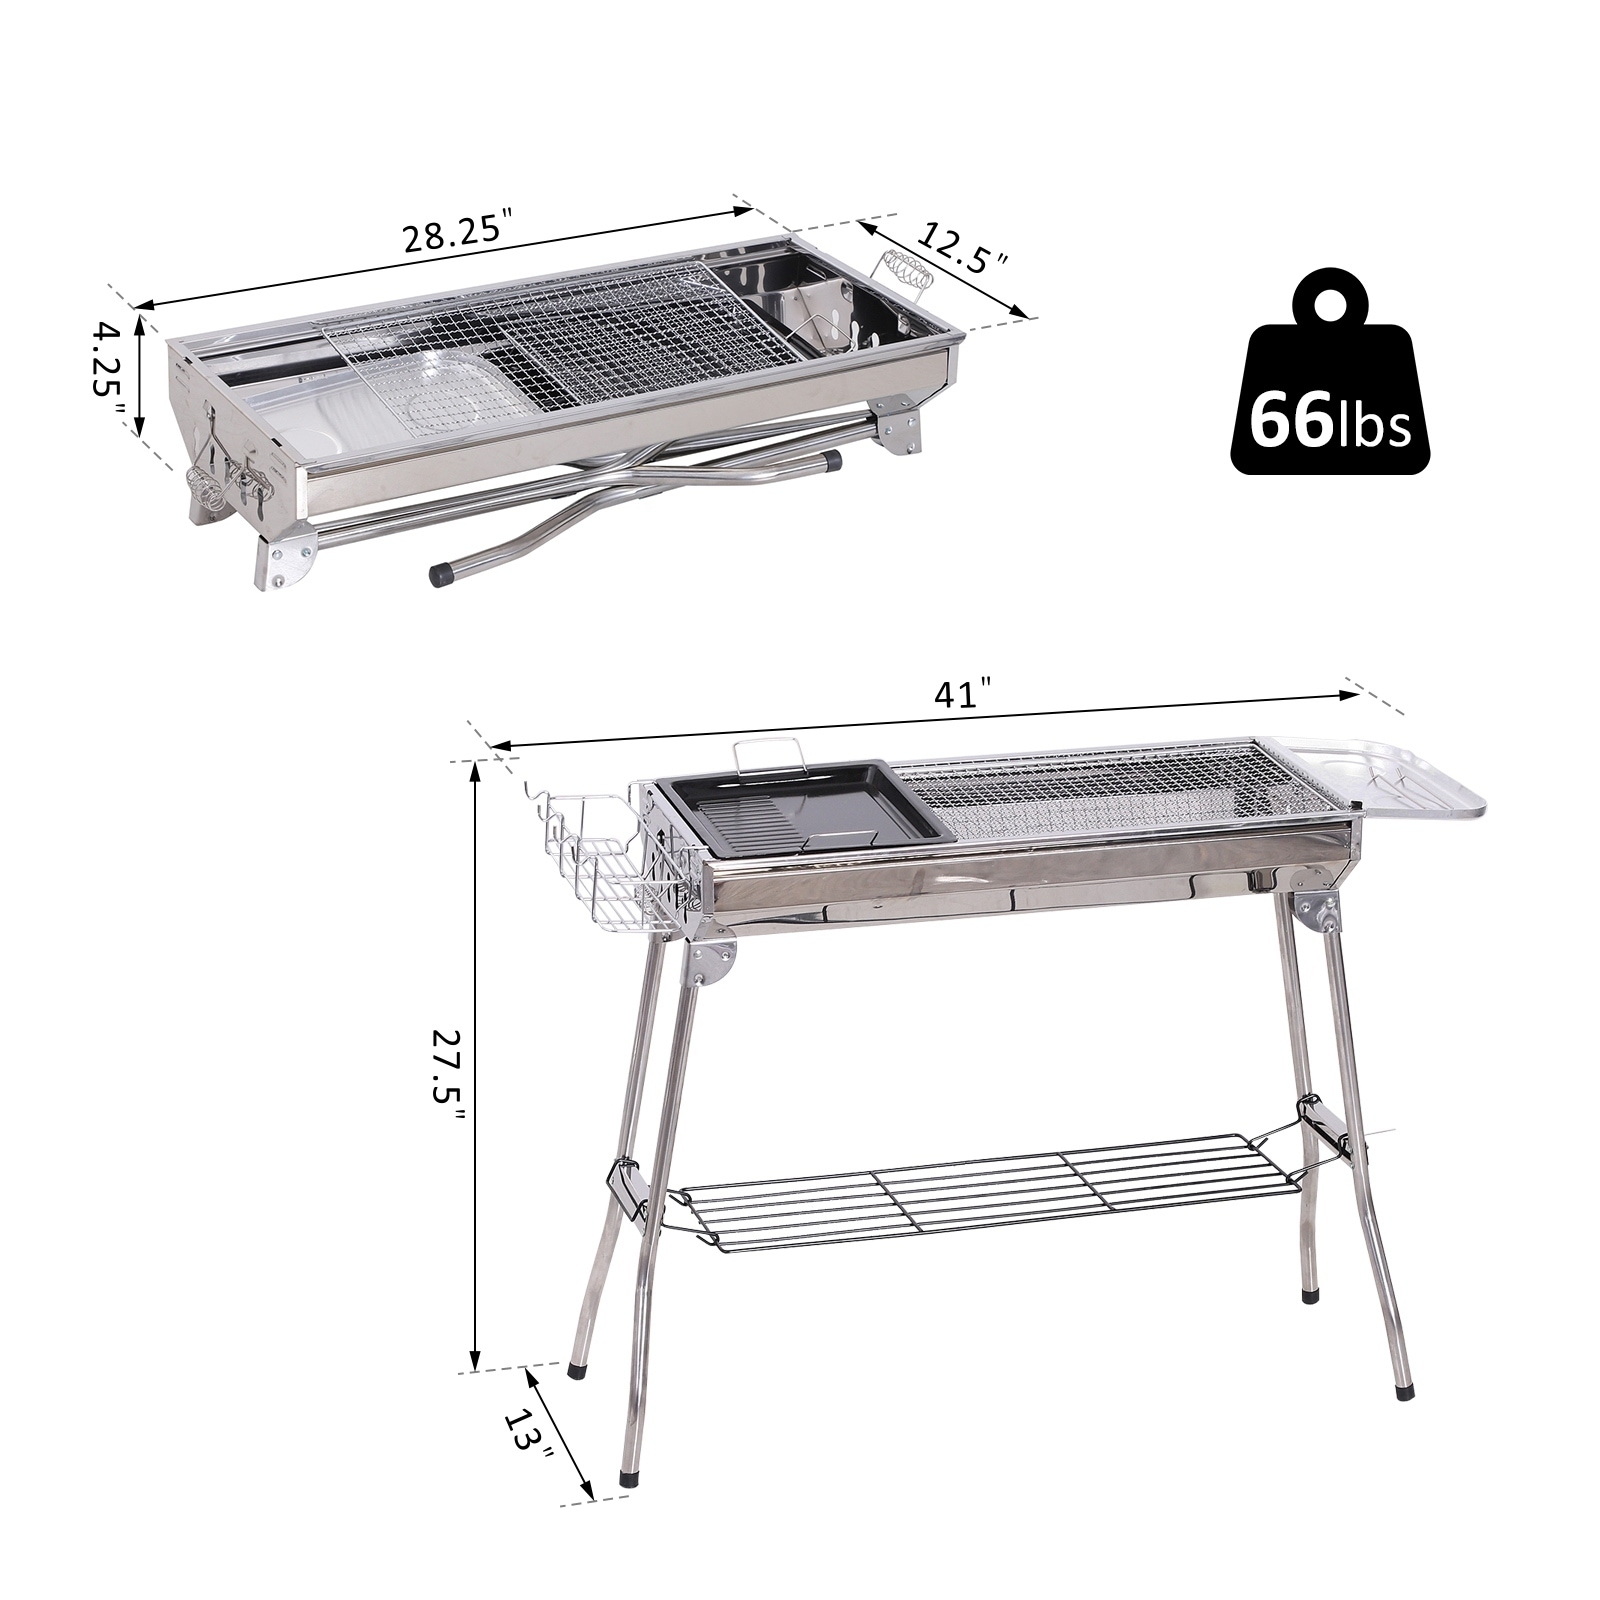 Outdoor Portable Folding Charcoal BBQ Grill Stainless Steel Picnic Barbecue U6O8 